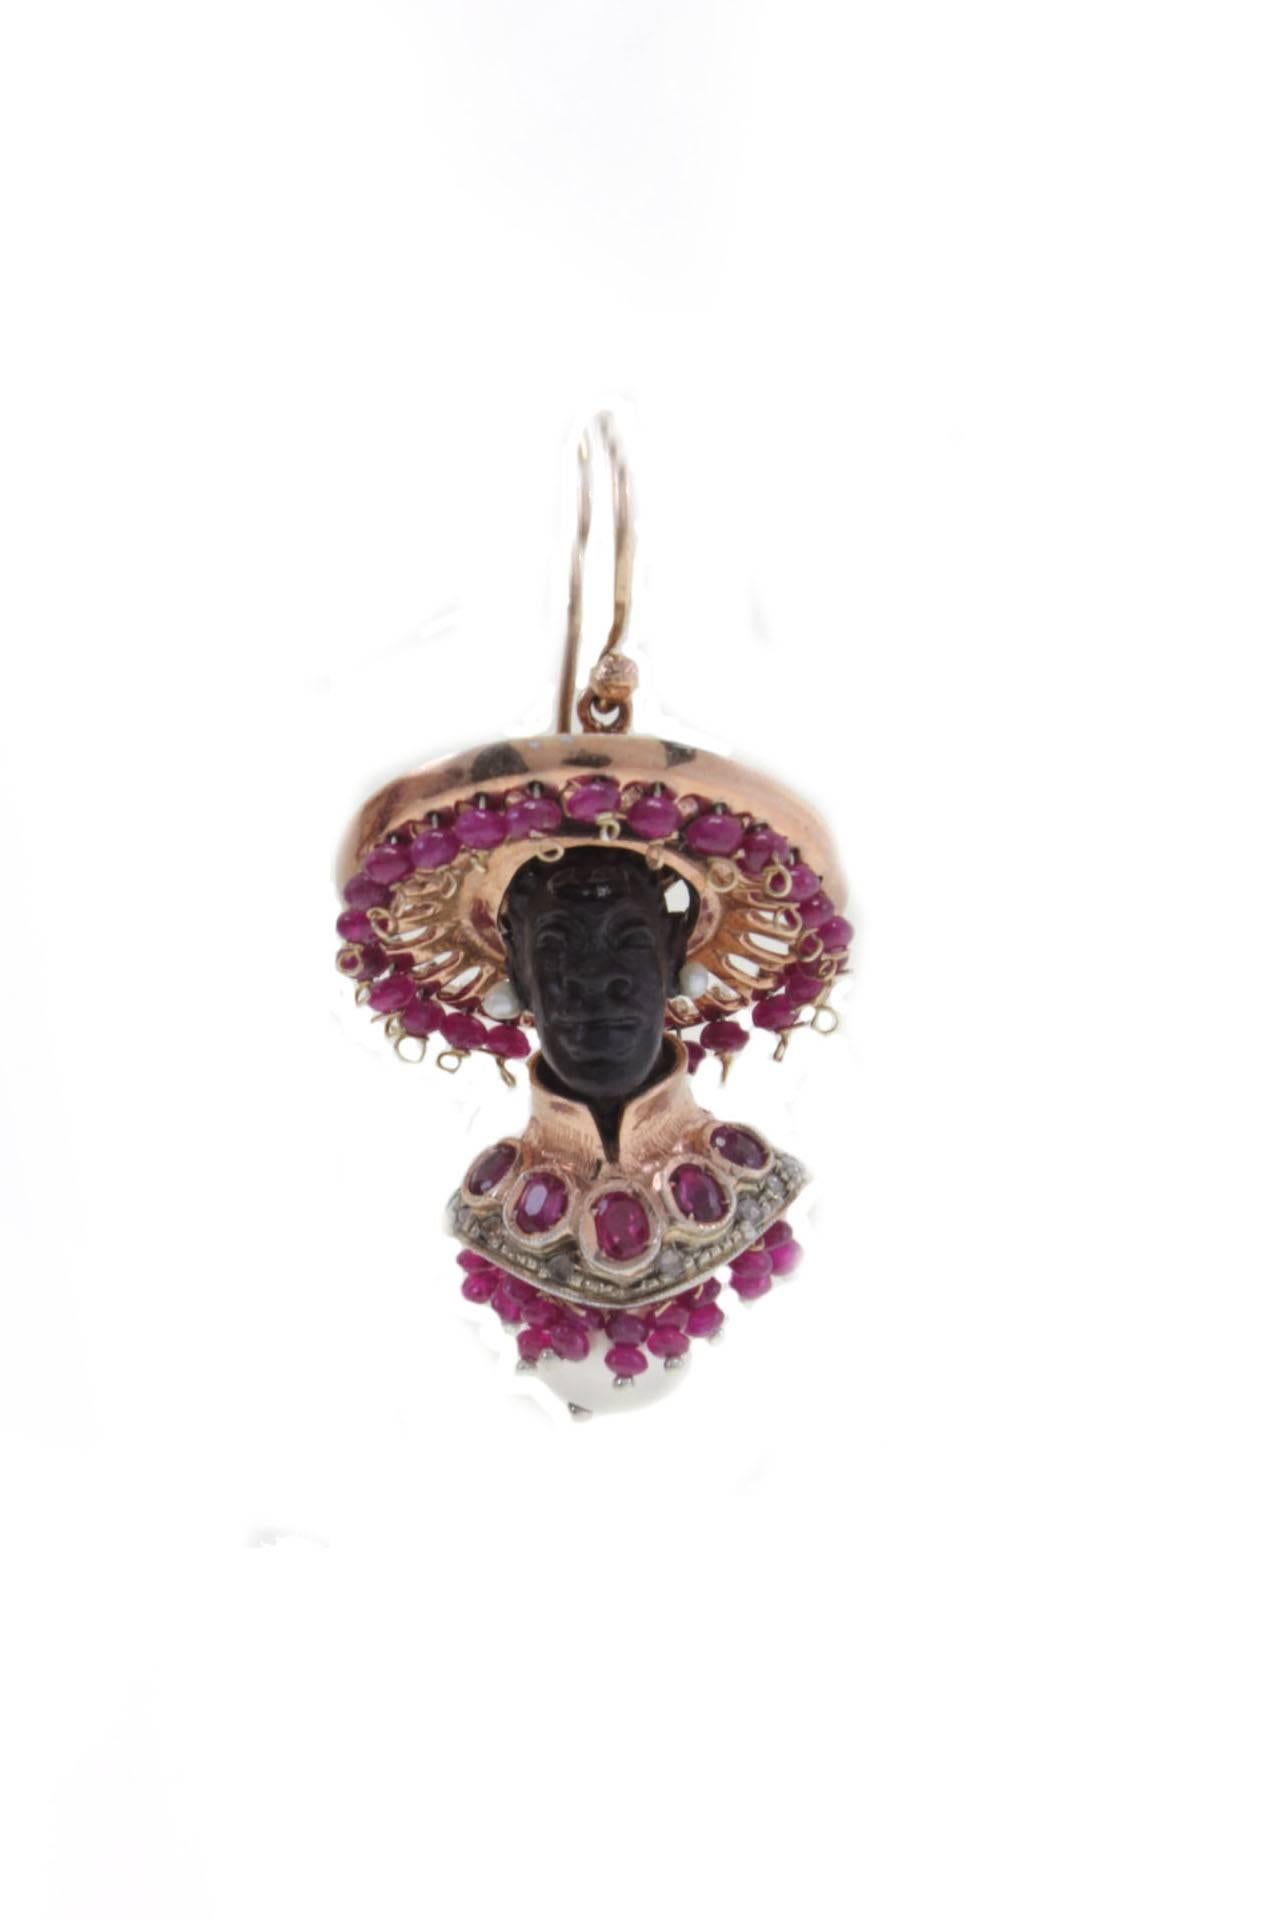 Moretti earrings in 9kt rose gold and silver, both composed of a carved ebony face with pearl earrings and a dress covered in diamonds and rubies with a pearl on the bottom. The hat is composed of dangle rubies all around and diamonds on the